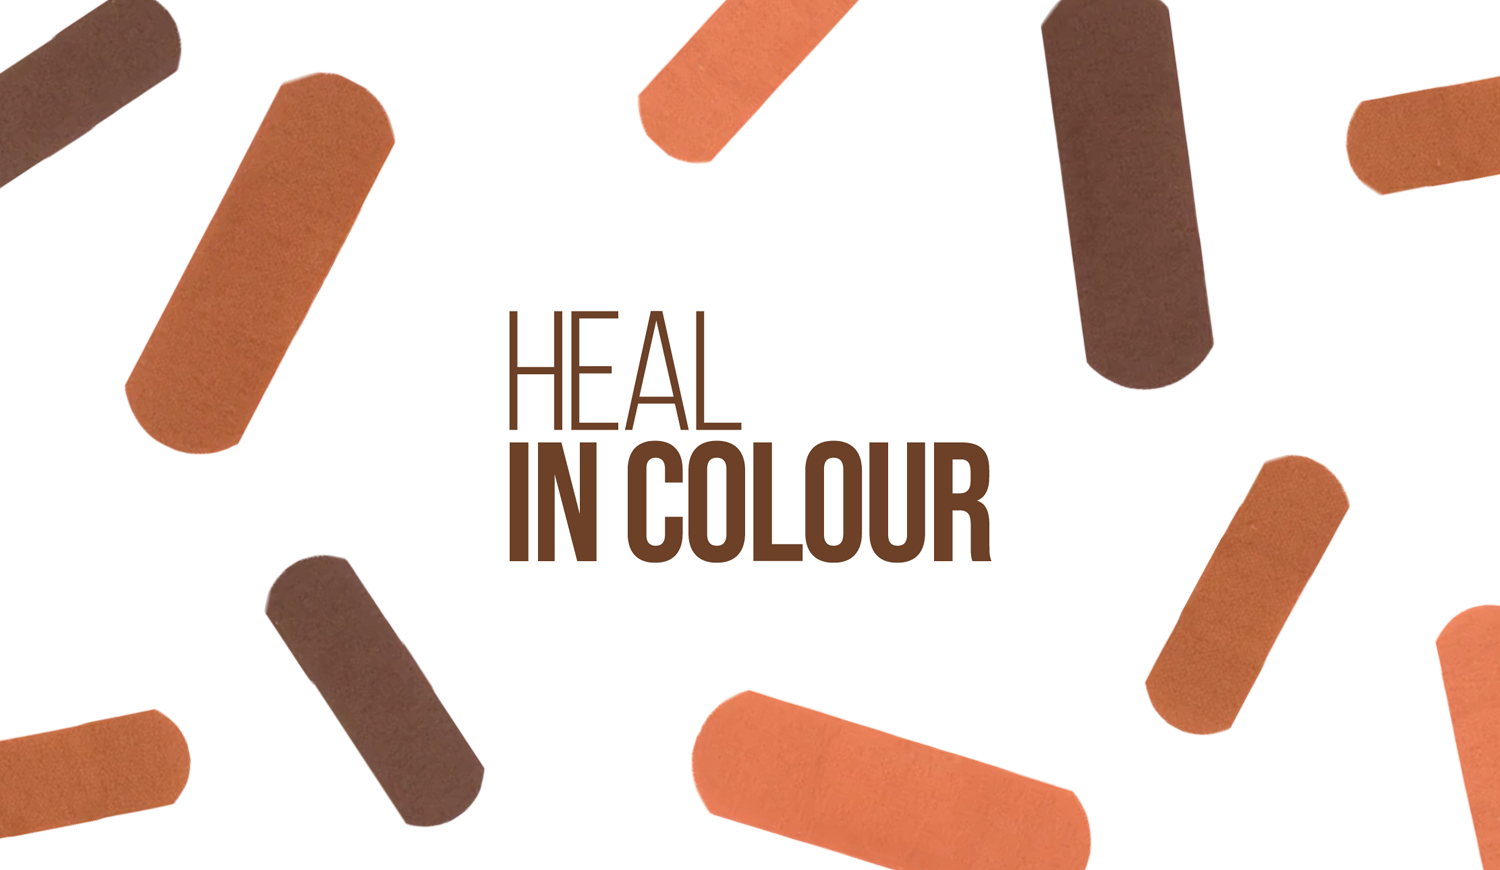 This Just In - Heal In Colour Bandages